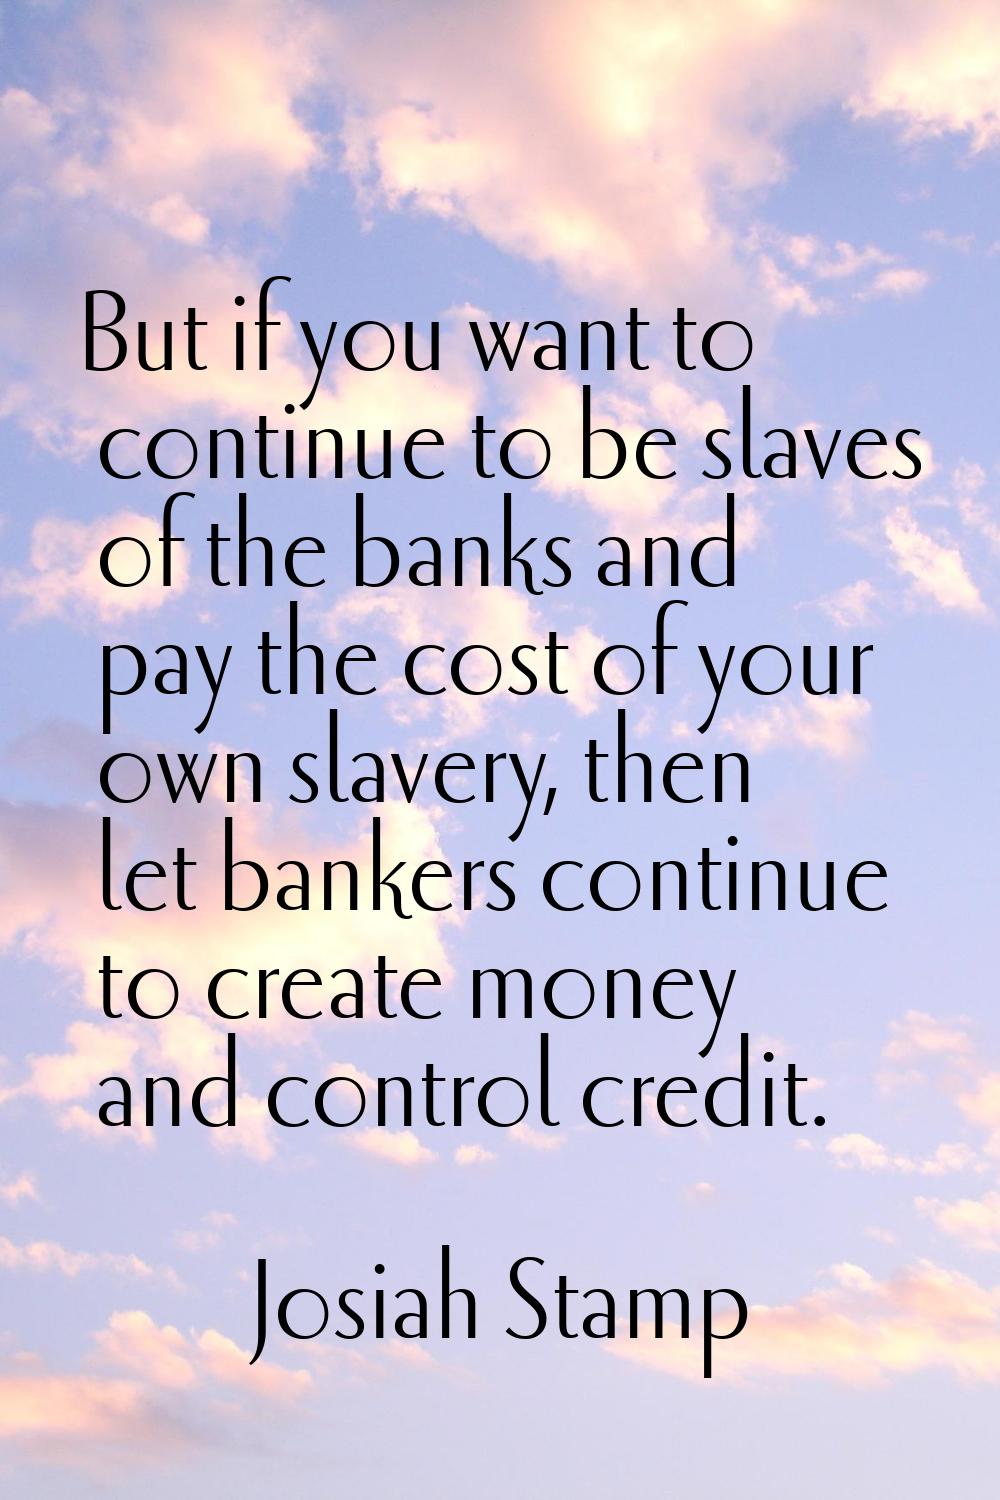 But if you want to continue to be slaves of the banks and pay the cost of your own slavery, then le